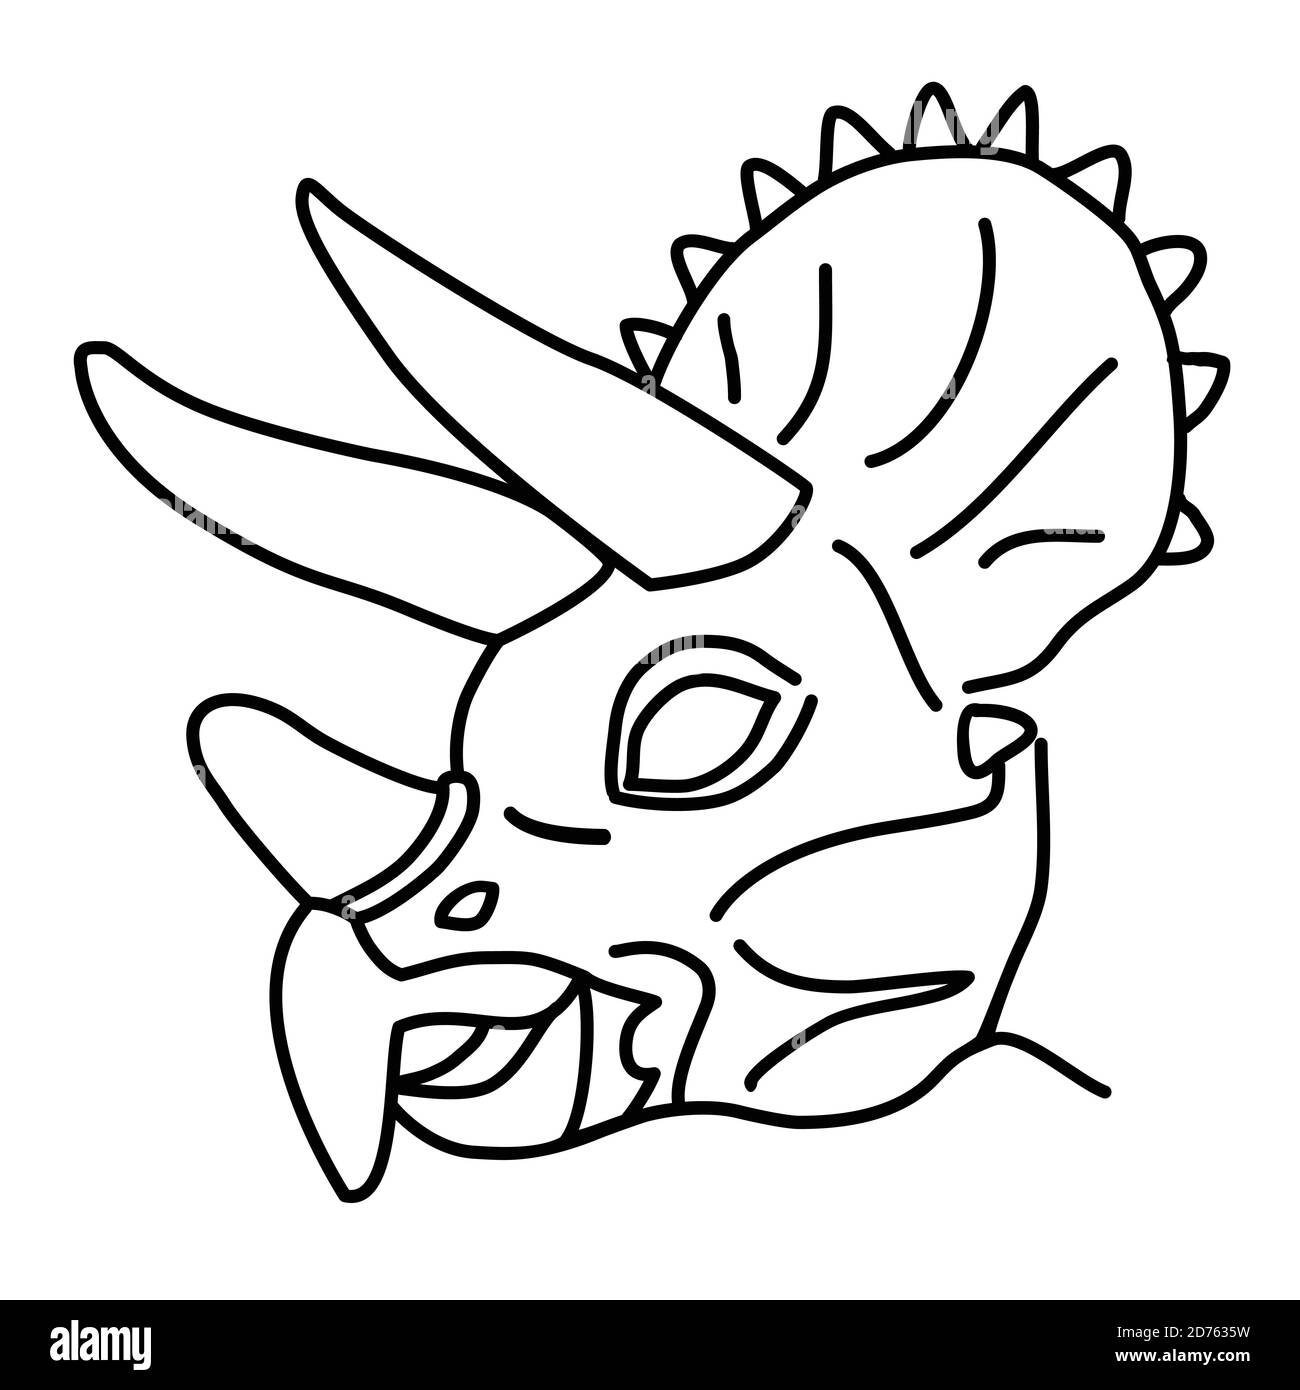 Triceratops Icon. Doodle Hand Drawn or Black Outline Icon Style Stock Vector